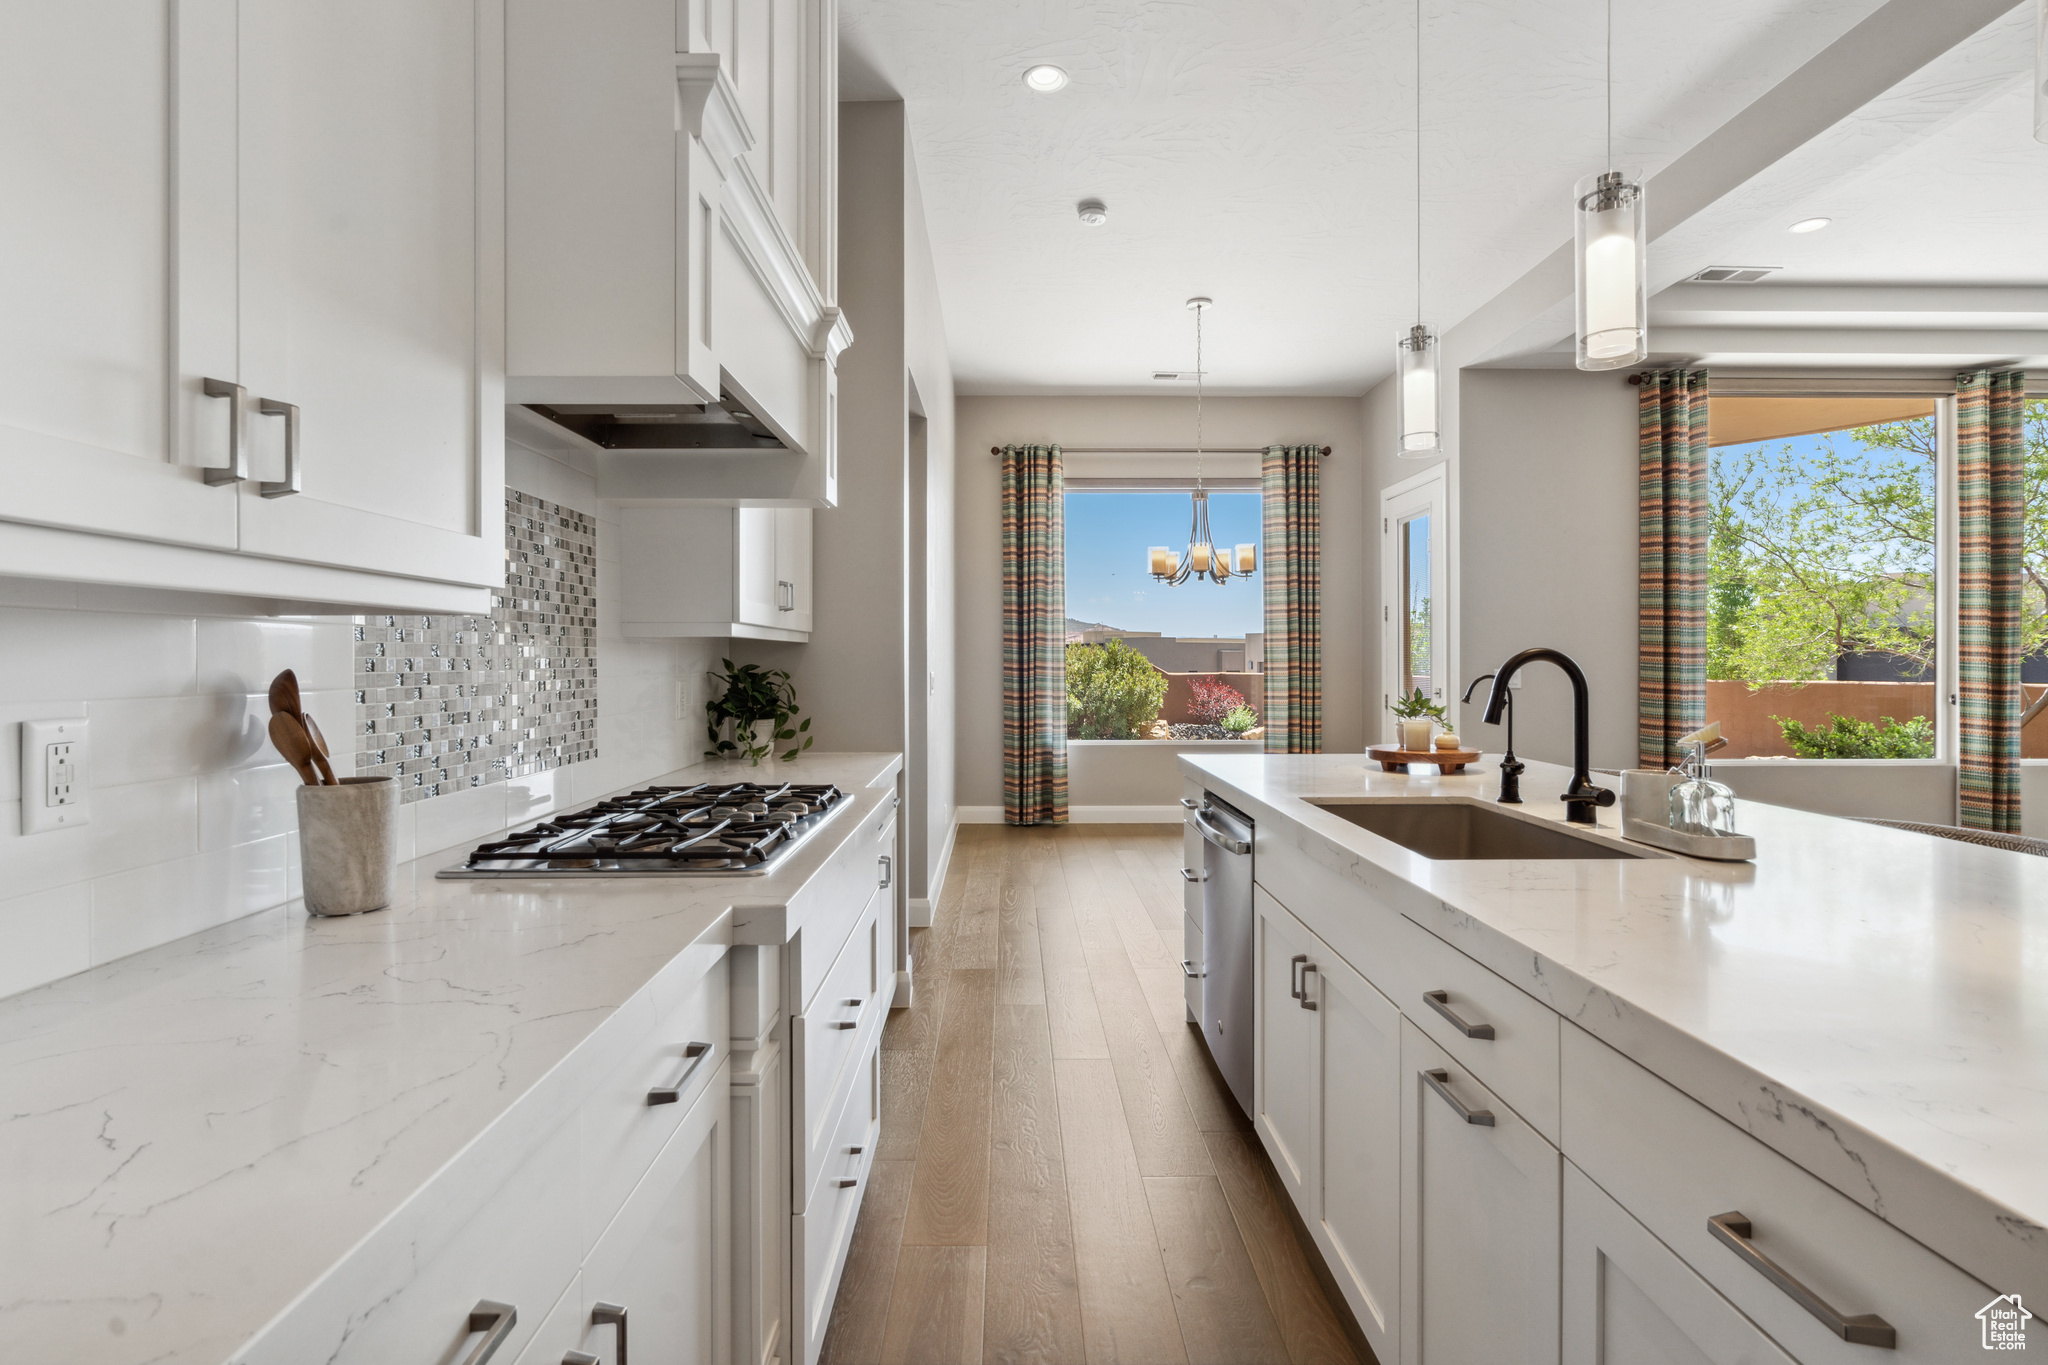 Kitchen featuring a wealth of natural light, hanging light fixtures, white cabinetry, and backsplash